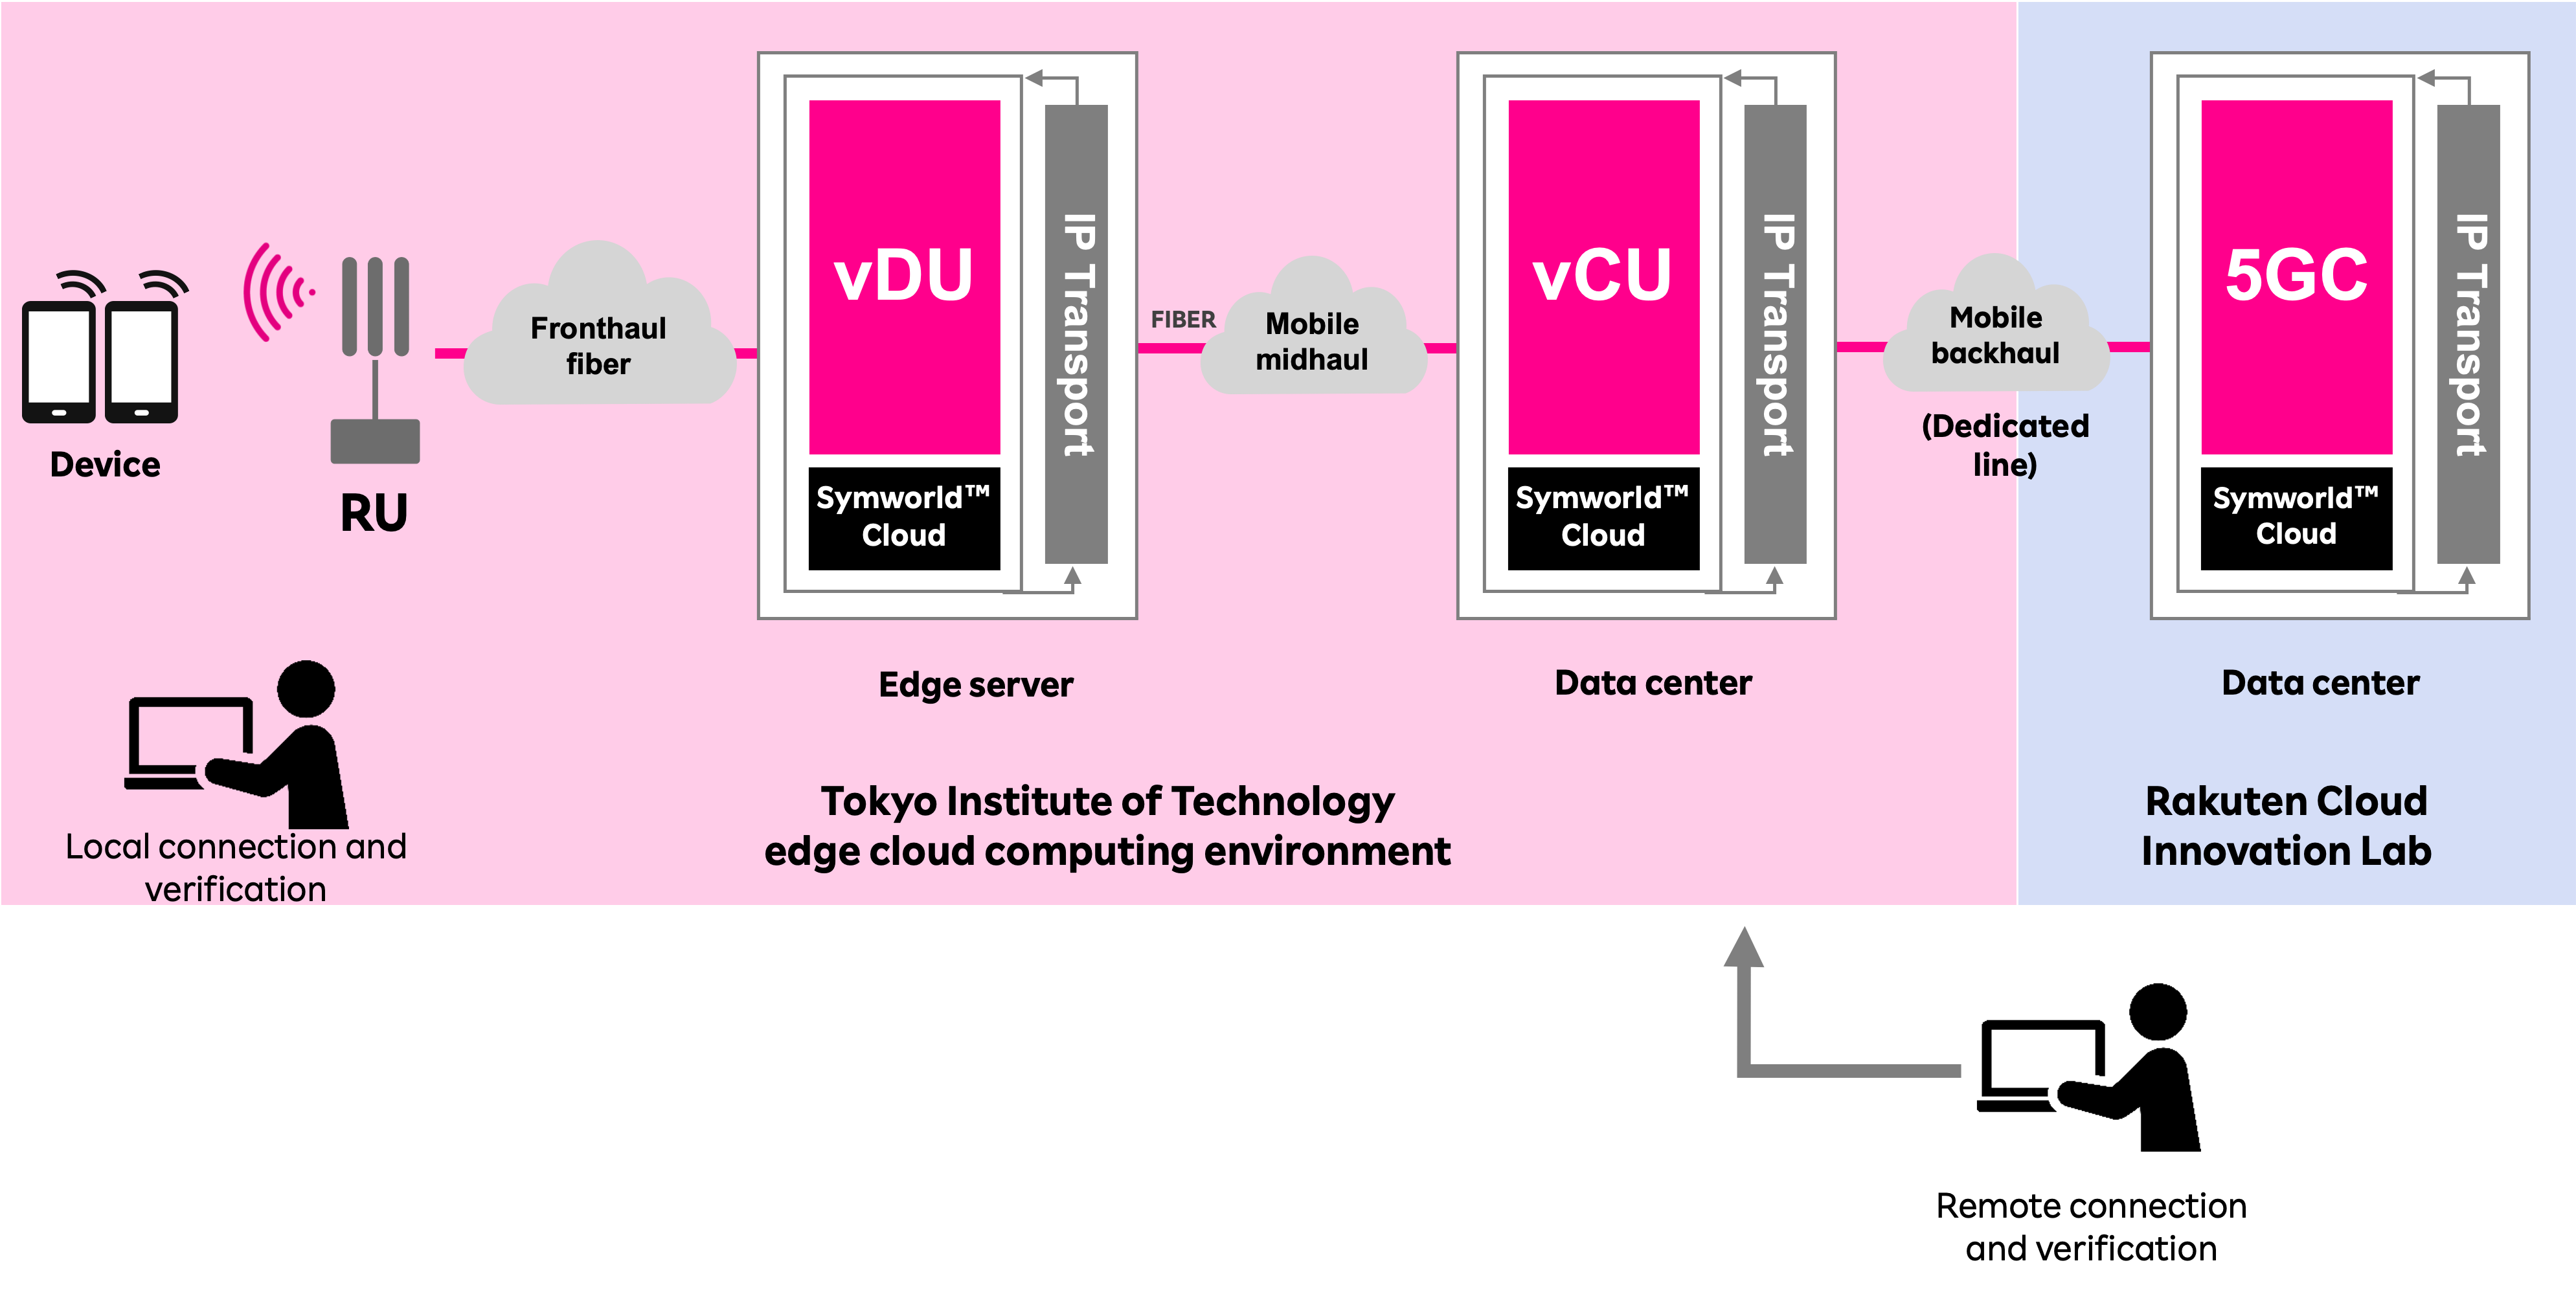 The Open vRAN technology verification environment in Tokyo Institute of Technology